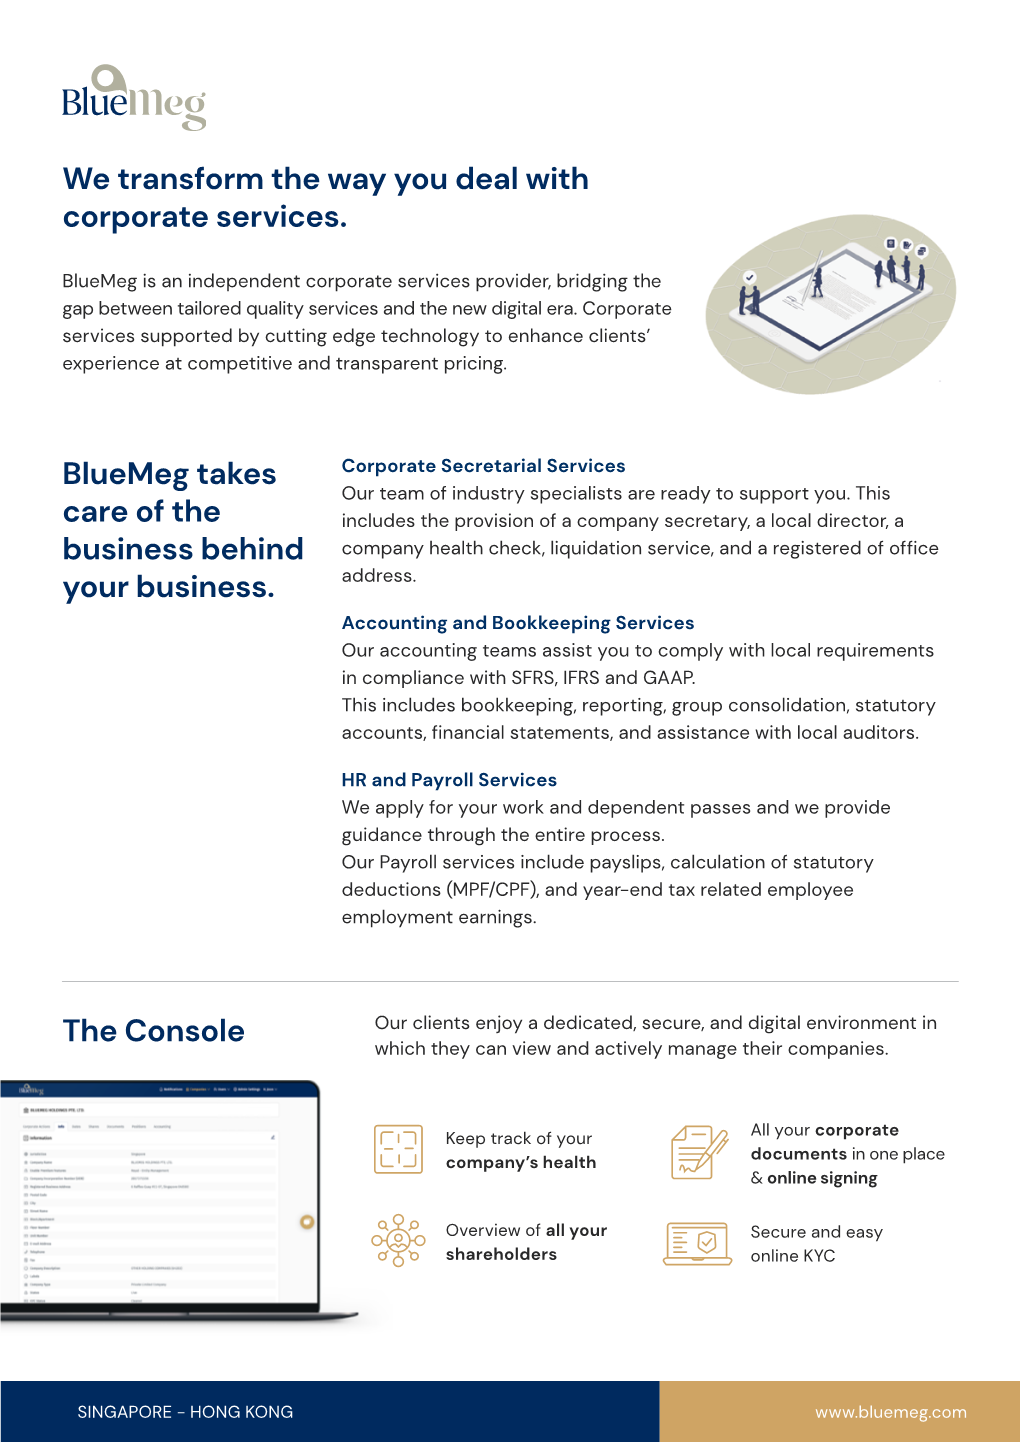 We Transform the Way You Deal with Corporate Services. Bluemeg Takes